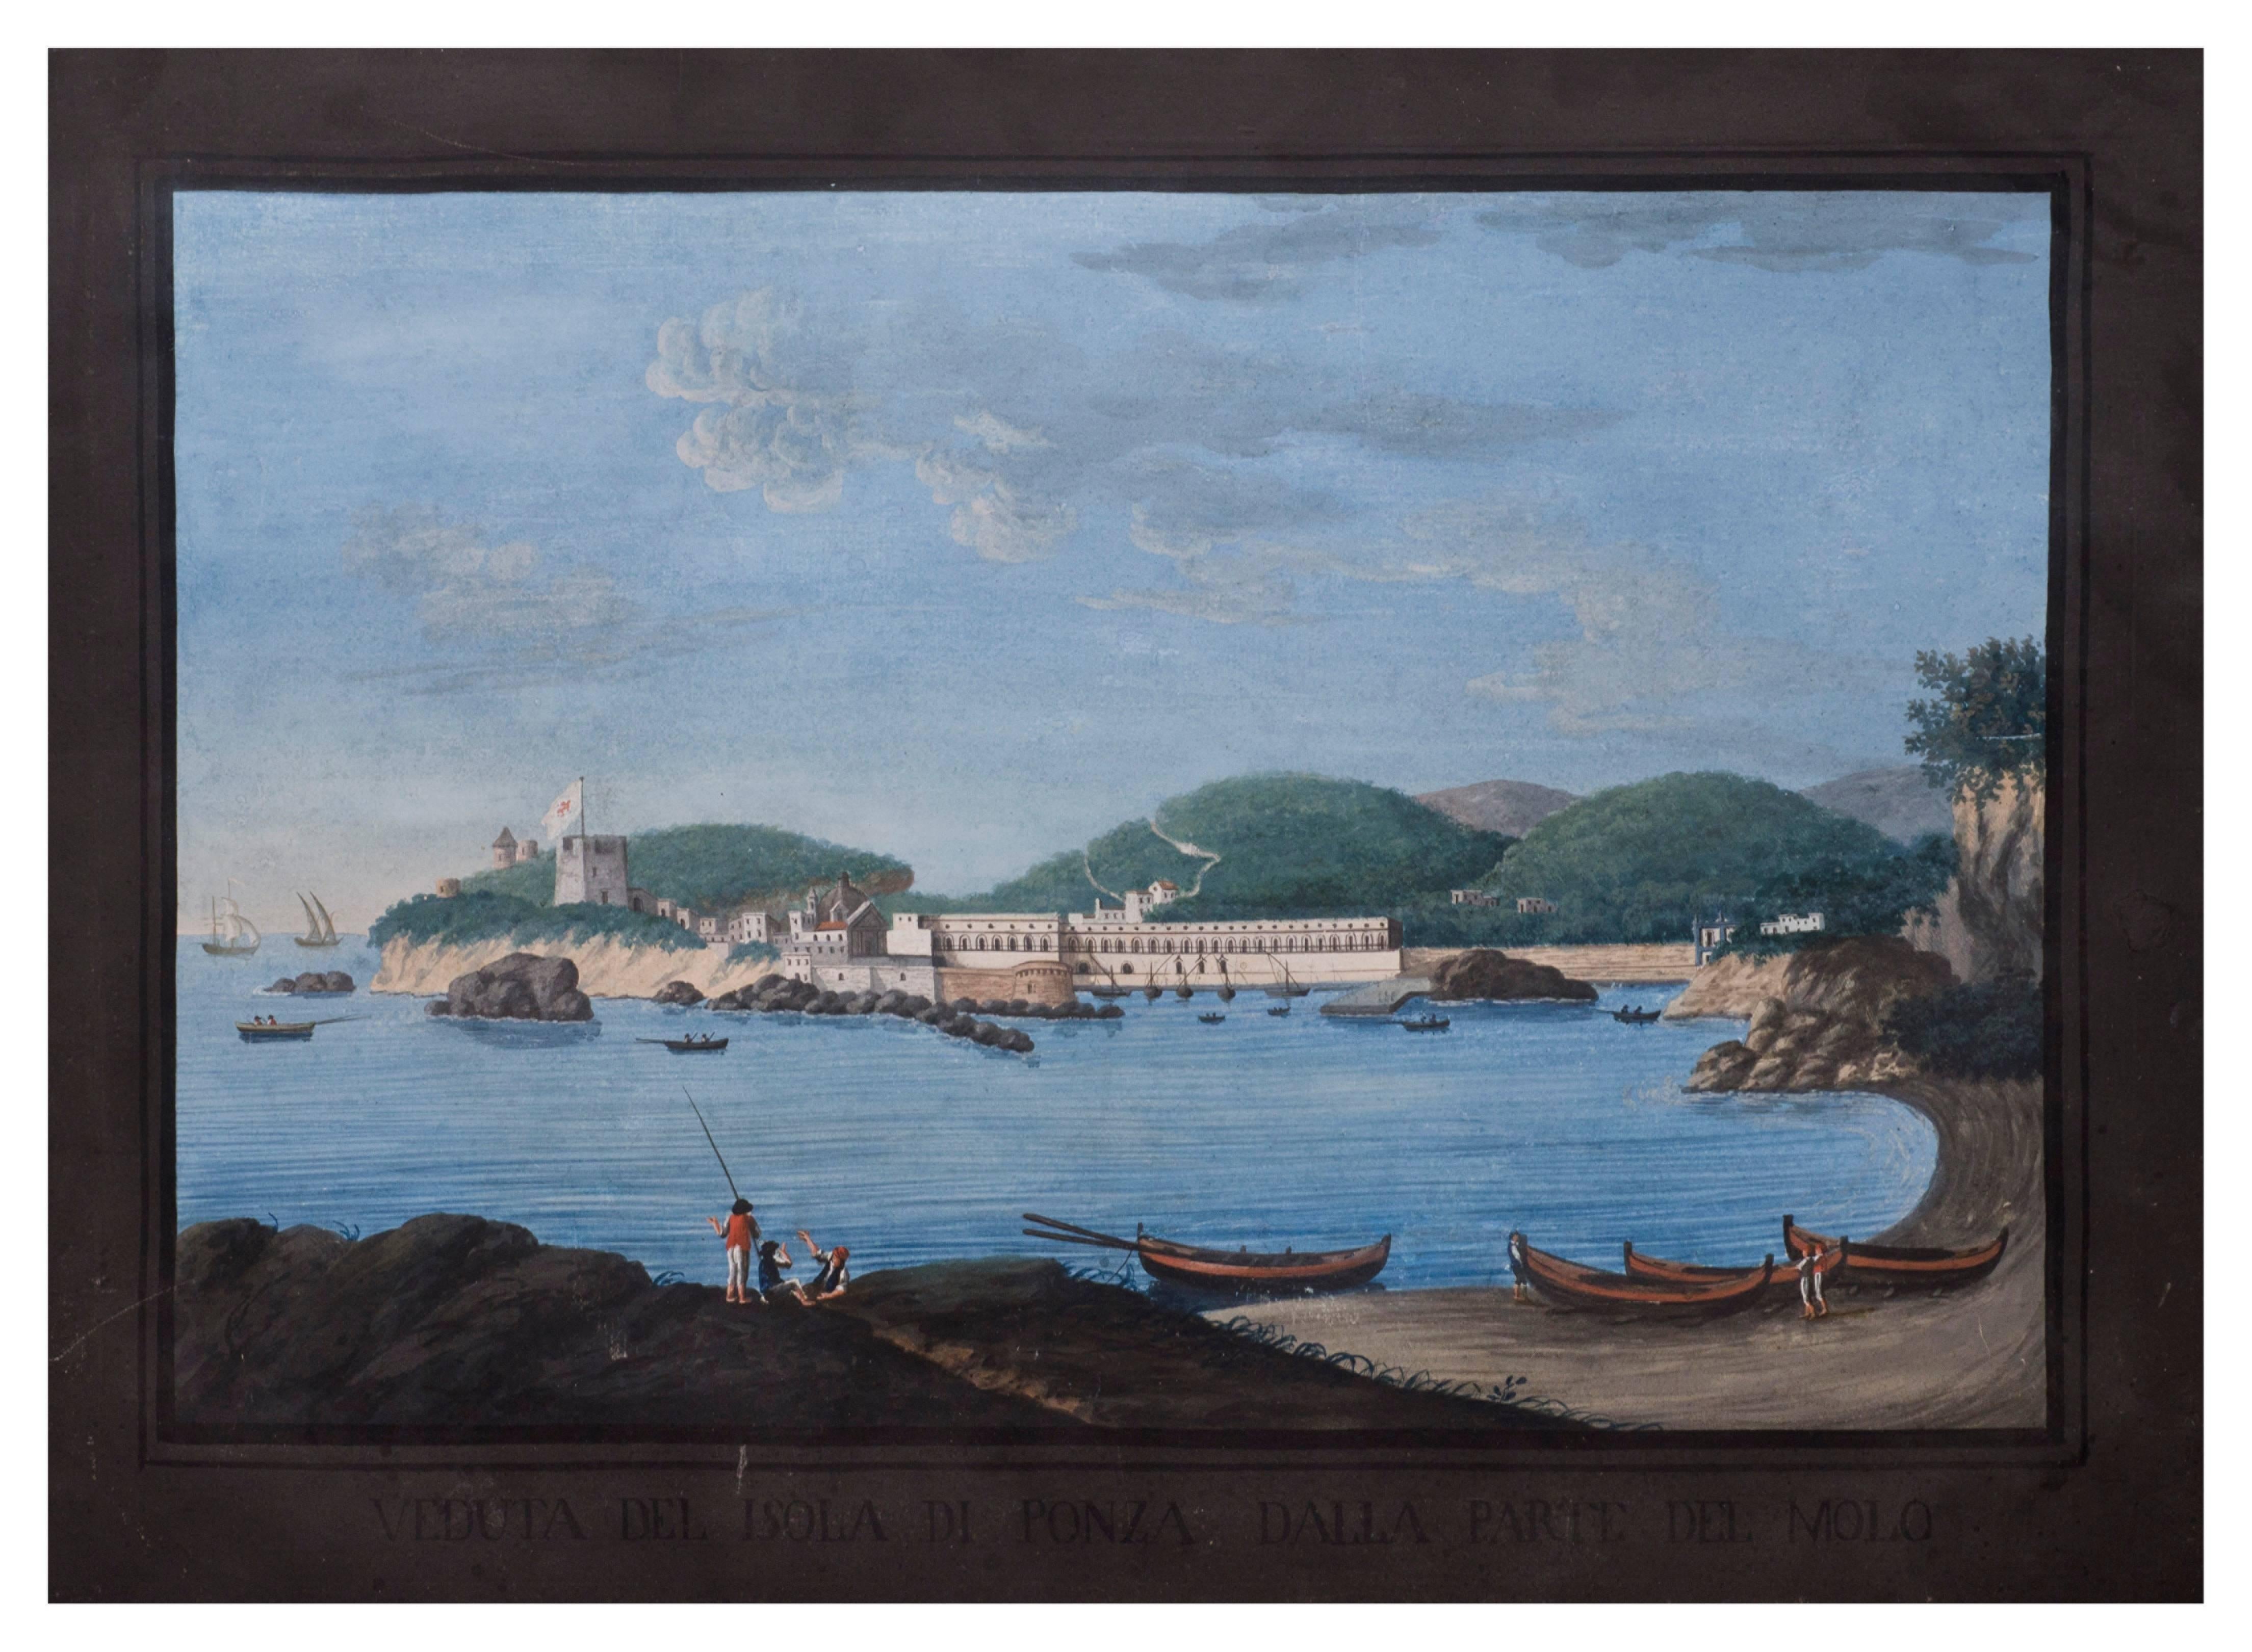 Unknown Figurative Painting - Ponza Island - Oil on Canvas - 18th century